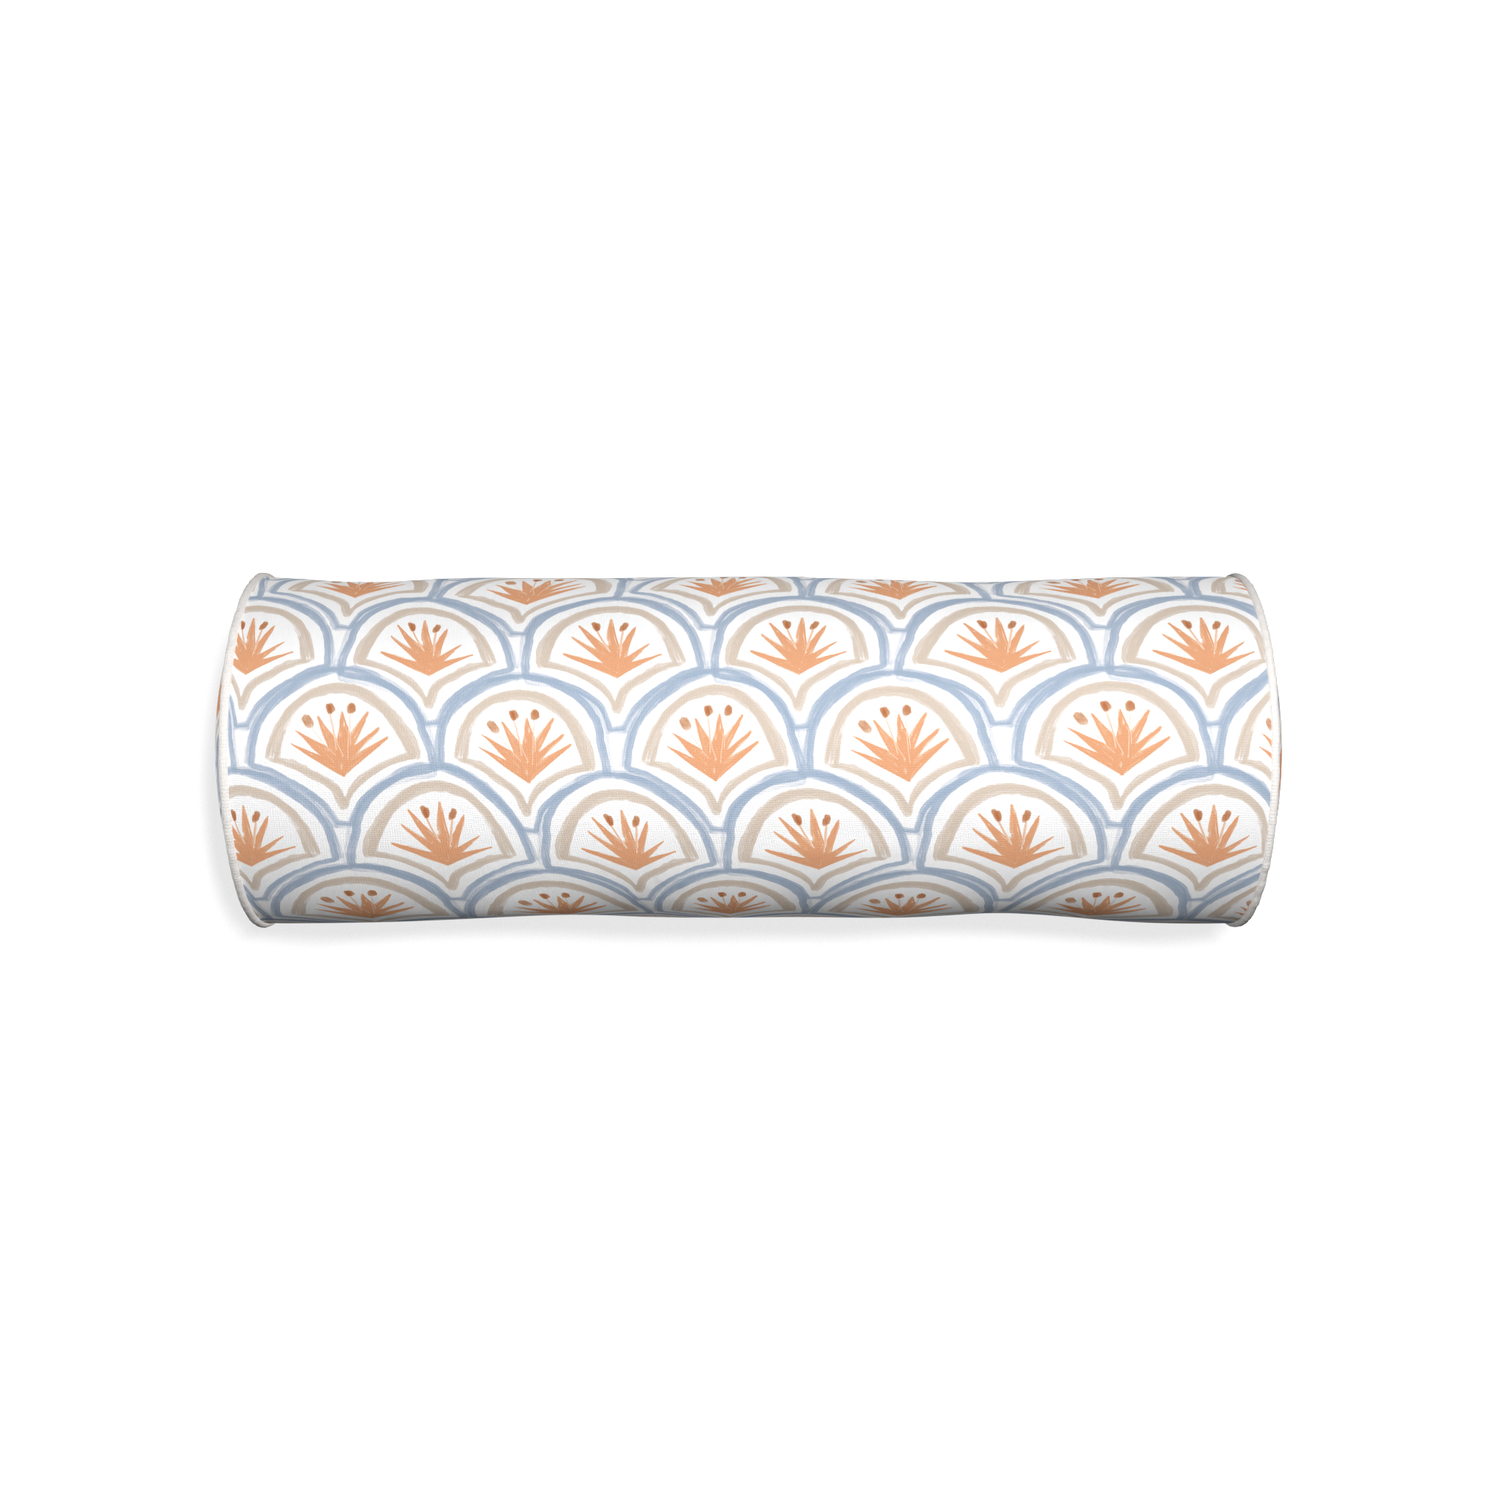 Bolster thatcher apricot custom pillow with snow piping on white background